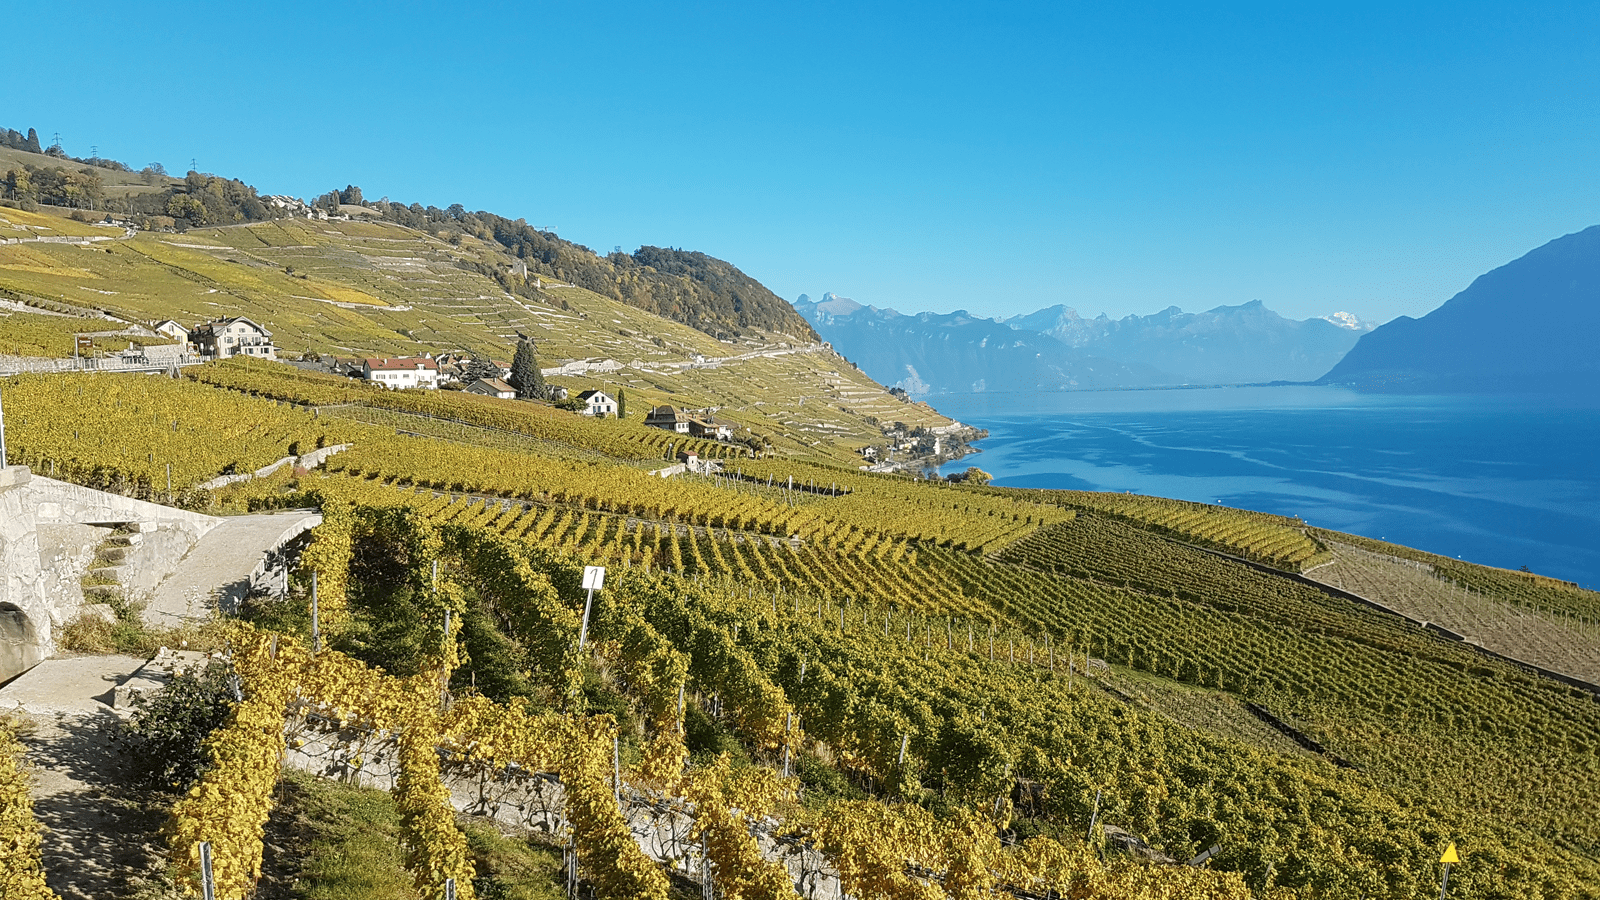 Experience the Wine trail in Lavaux